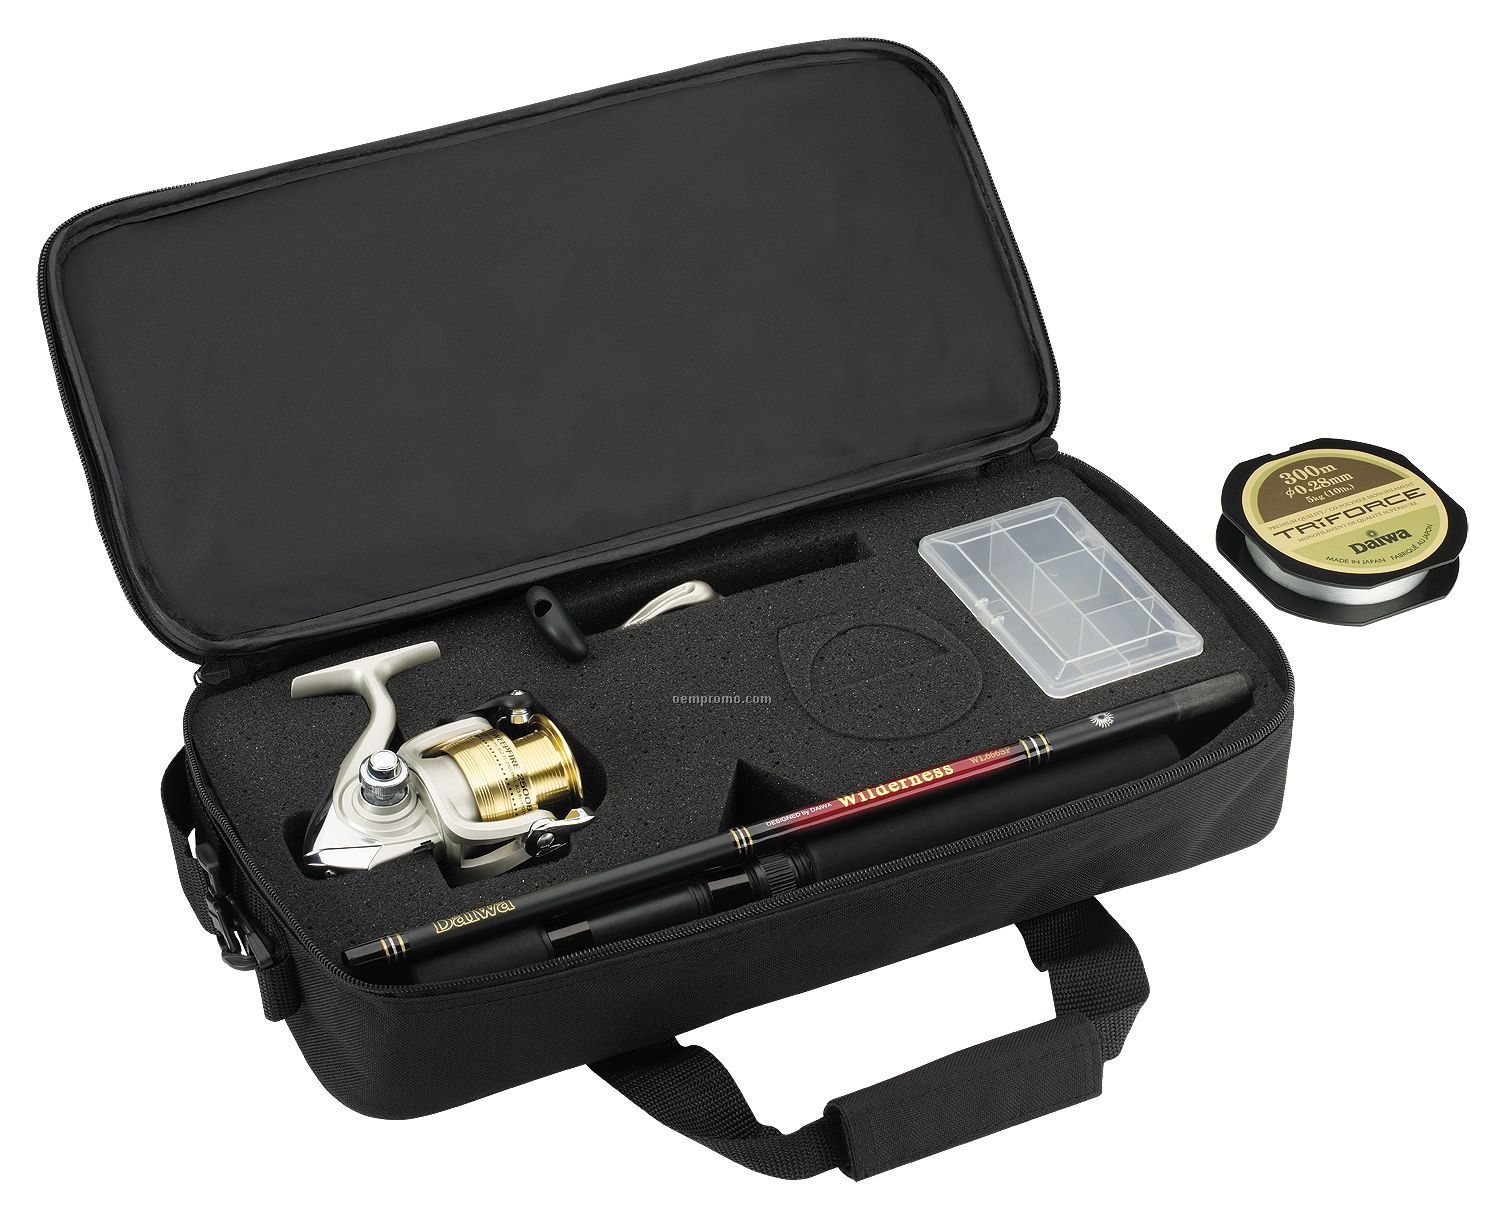 Daiwa Sweepfire Executive Rod & Reel Travel Pack In Soft Case